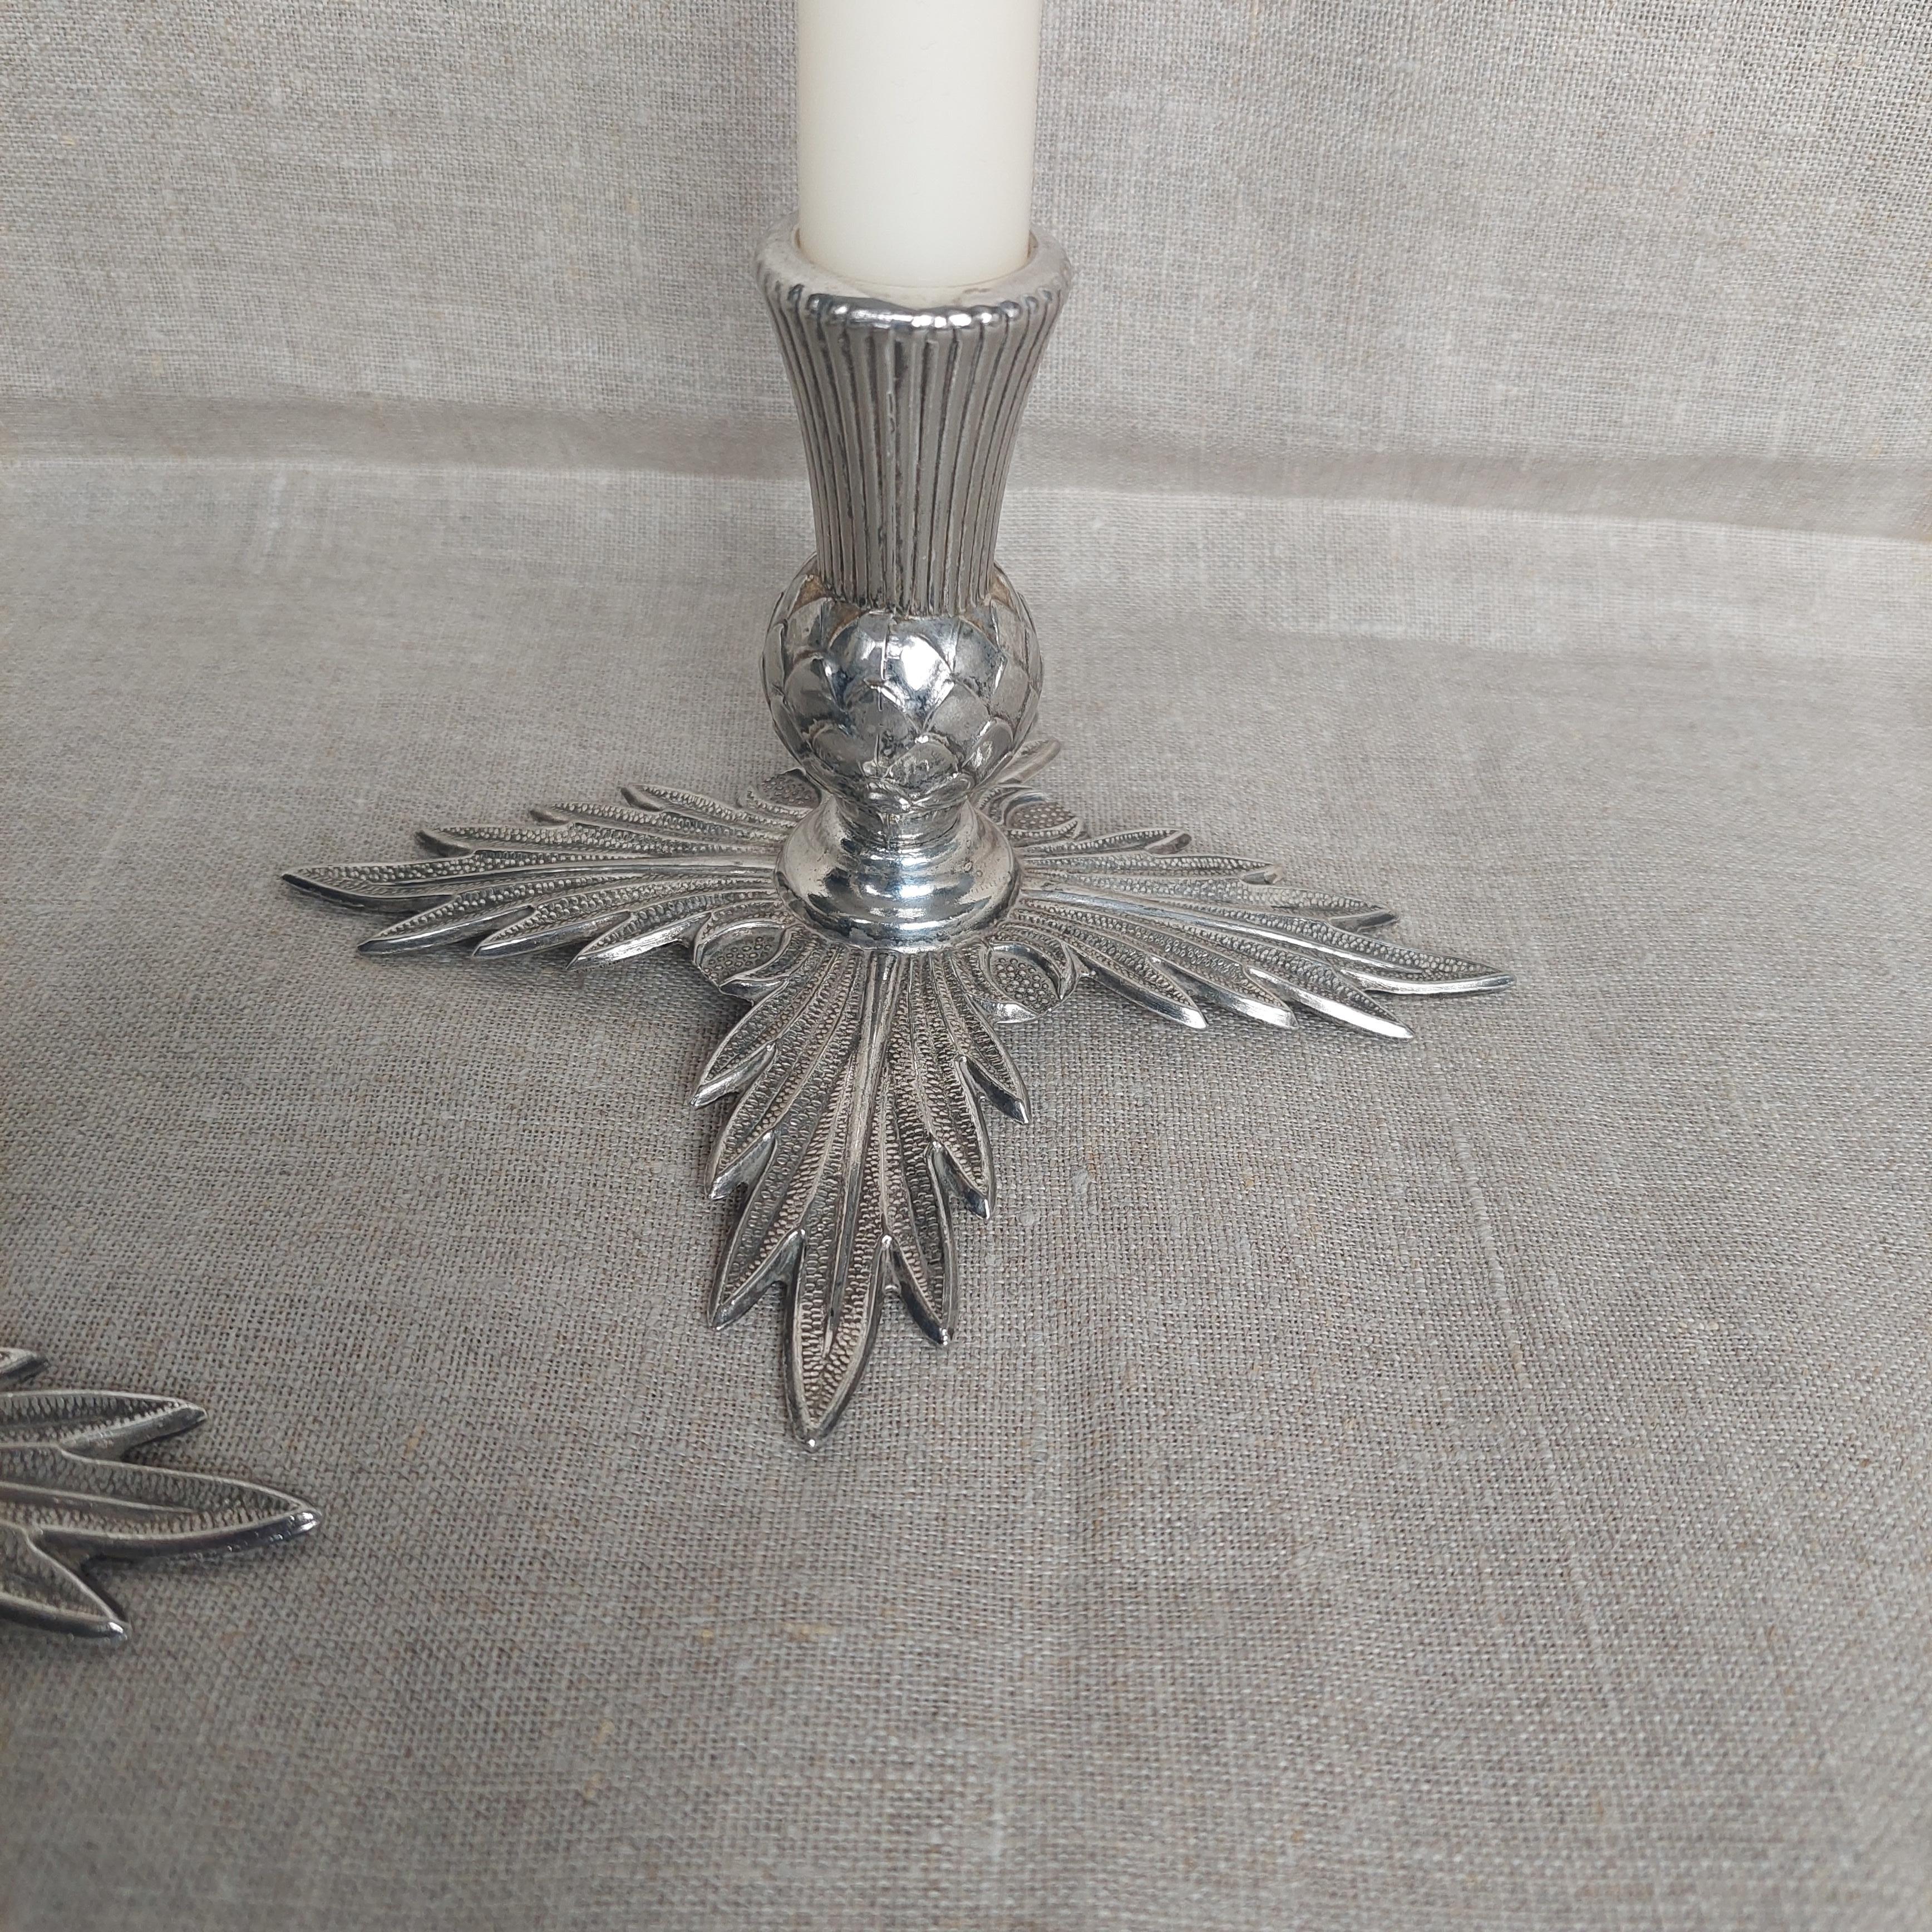 Art Deco Midcentury Metal Thistle Candlesticks Holder Display Candle 1940-1950s Ianthe